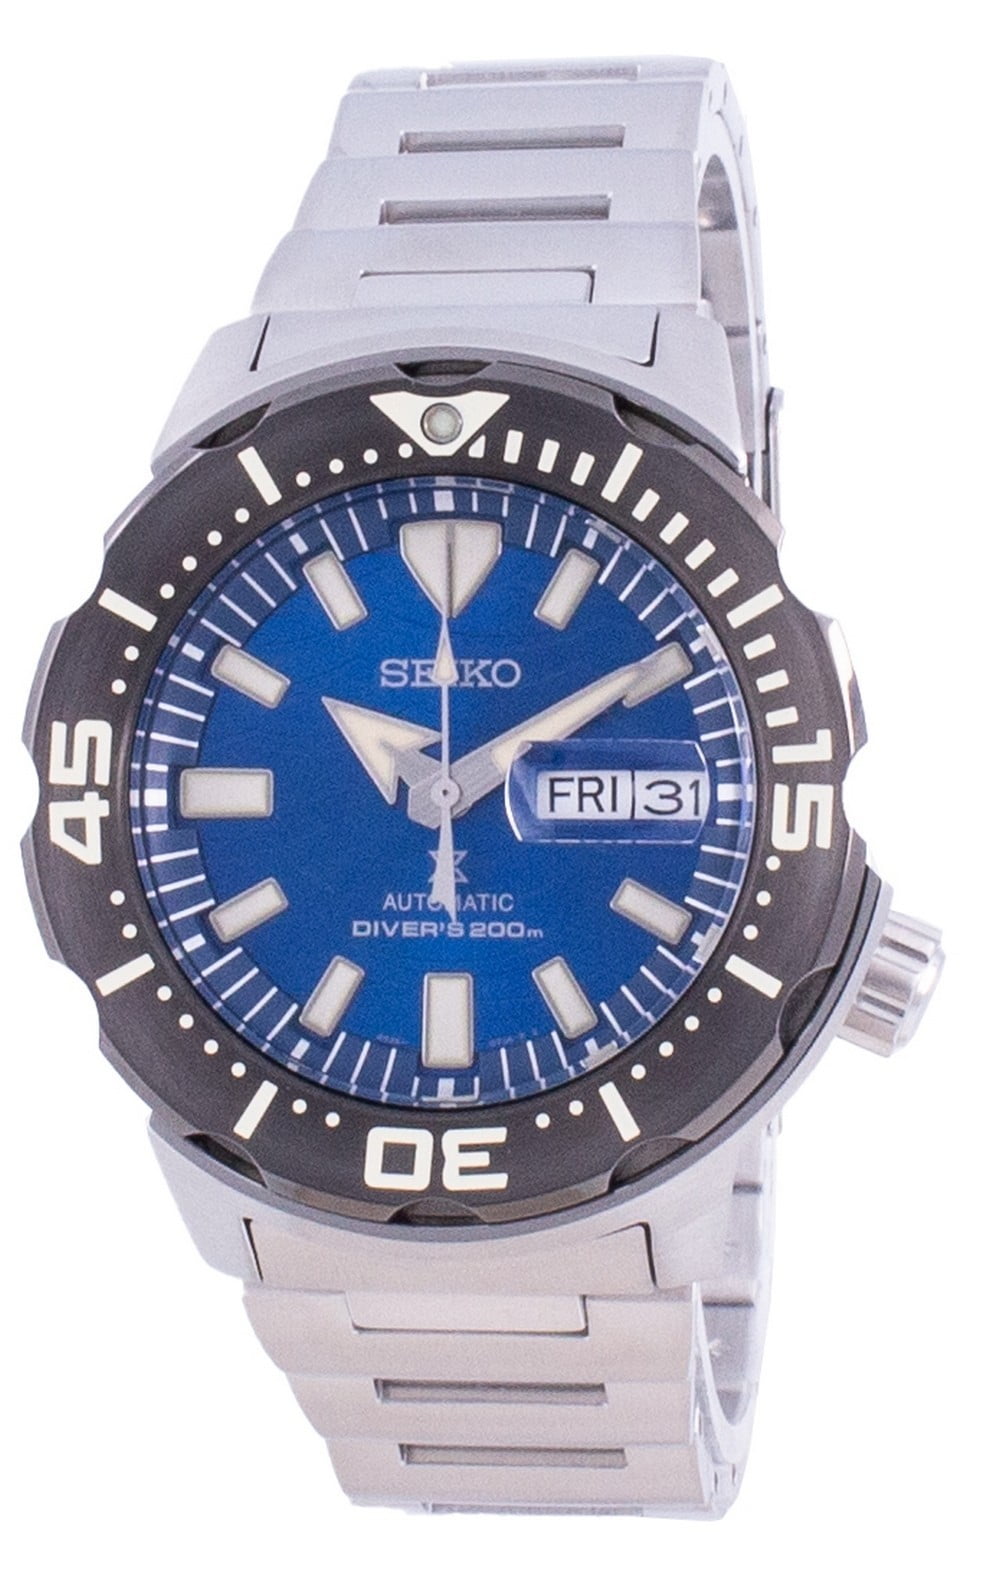 Prospex Save The Special Edition Diver's Automatic Srpe09 Srpe09k1 Srpe09k 200m Watch - Walmart.com